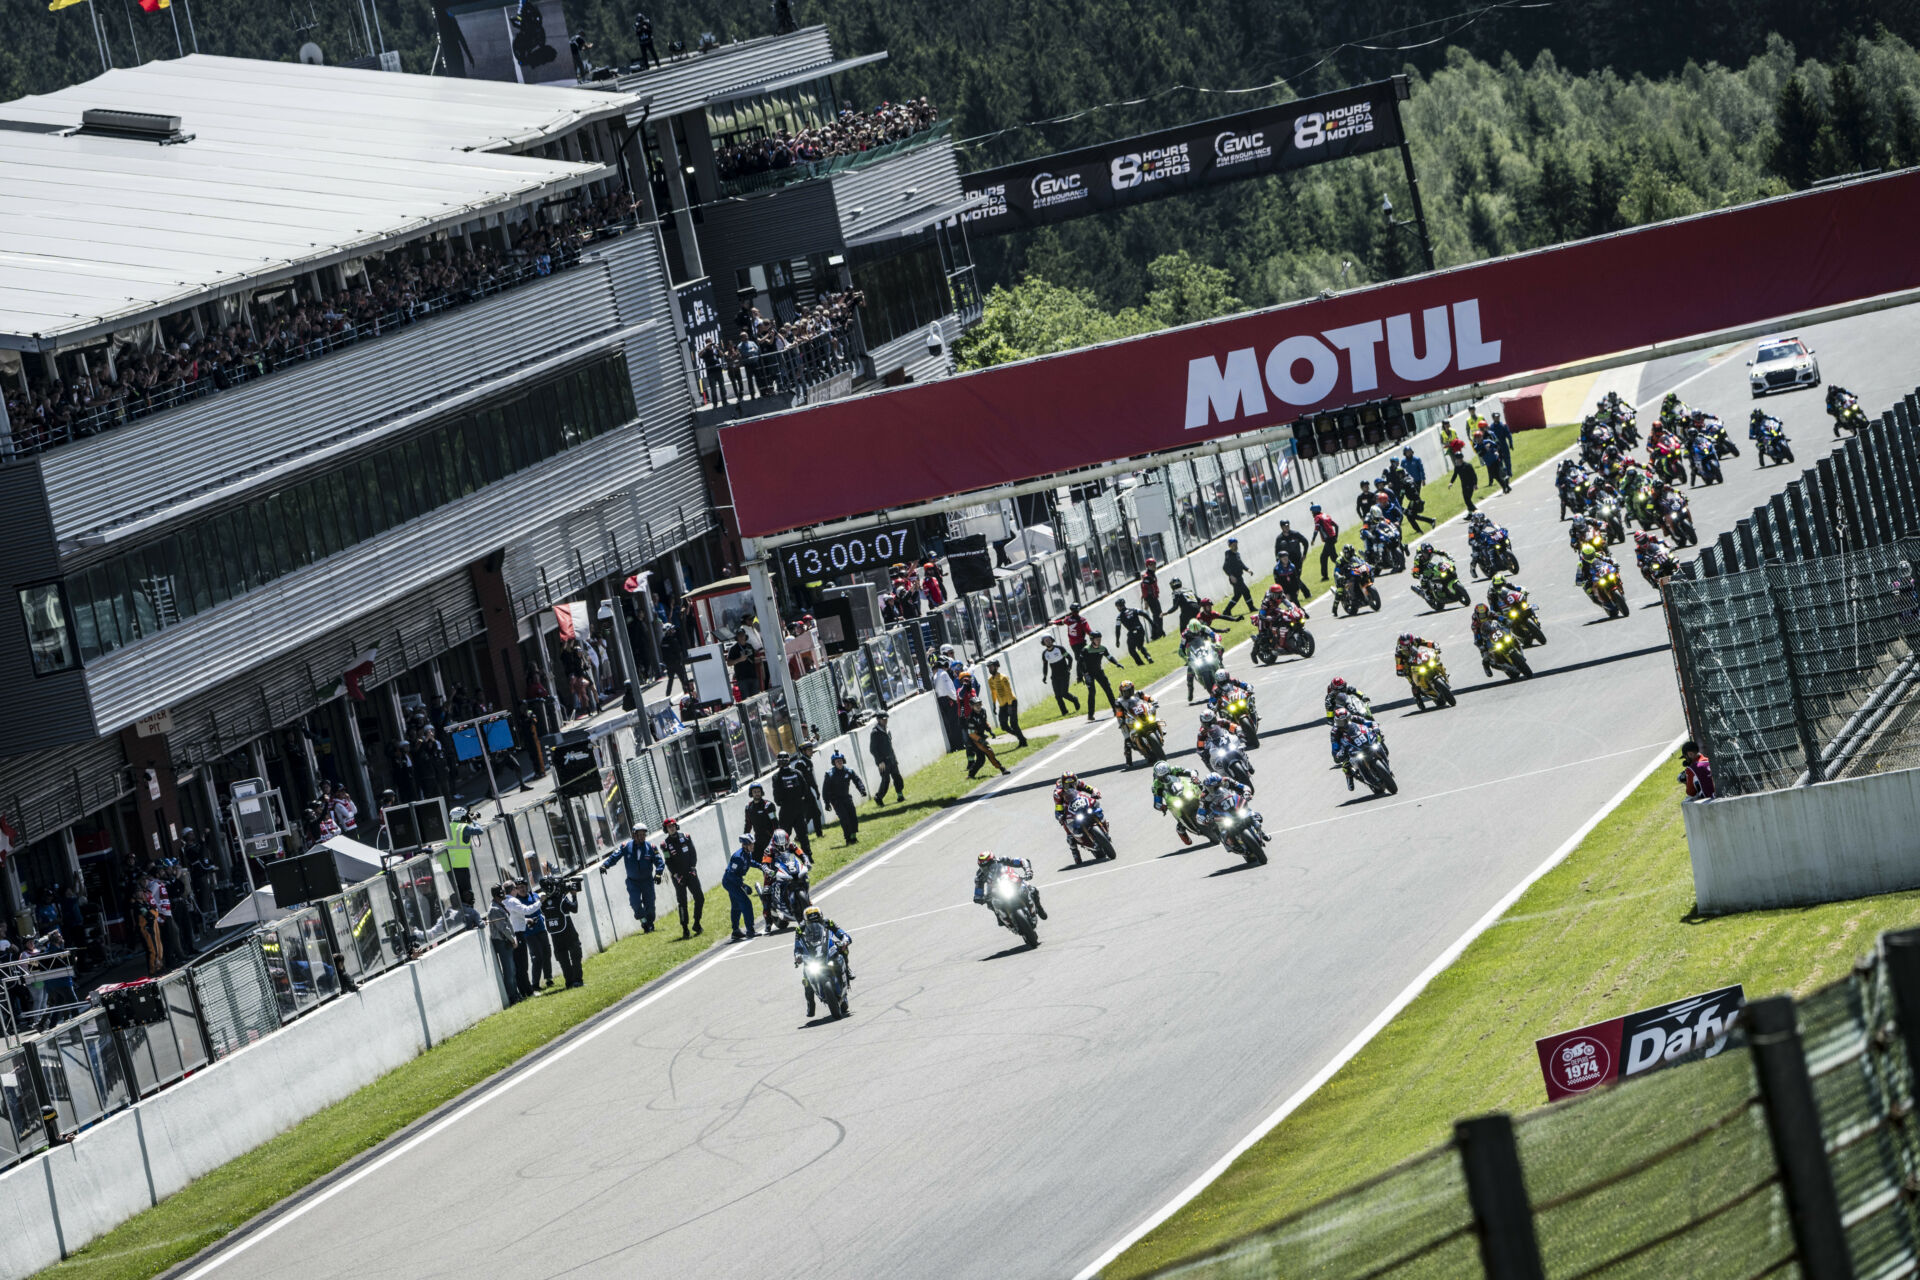 The Le Mans-style start of the 8 Hours of Spa. Photo courtesy Yamaha.